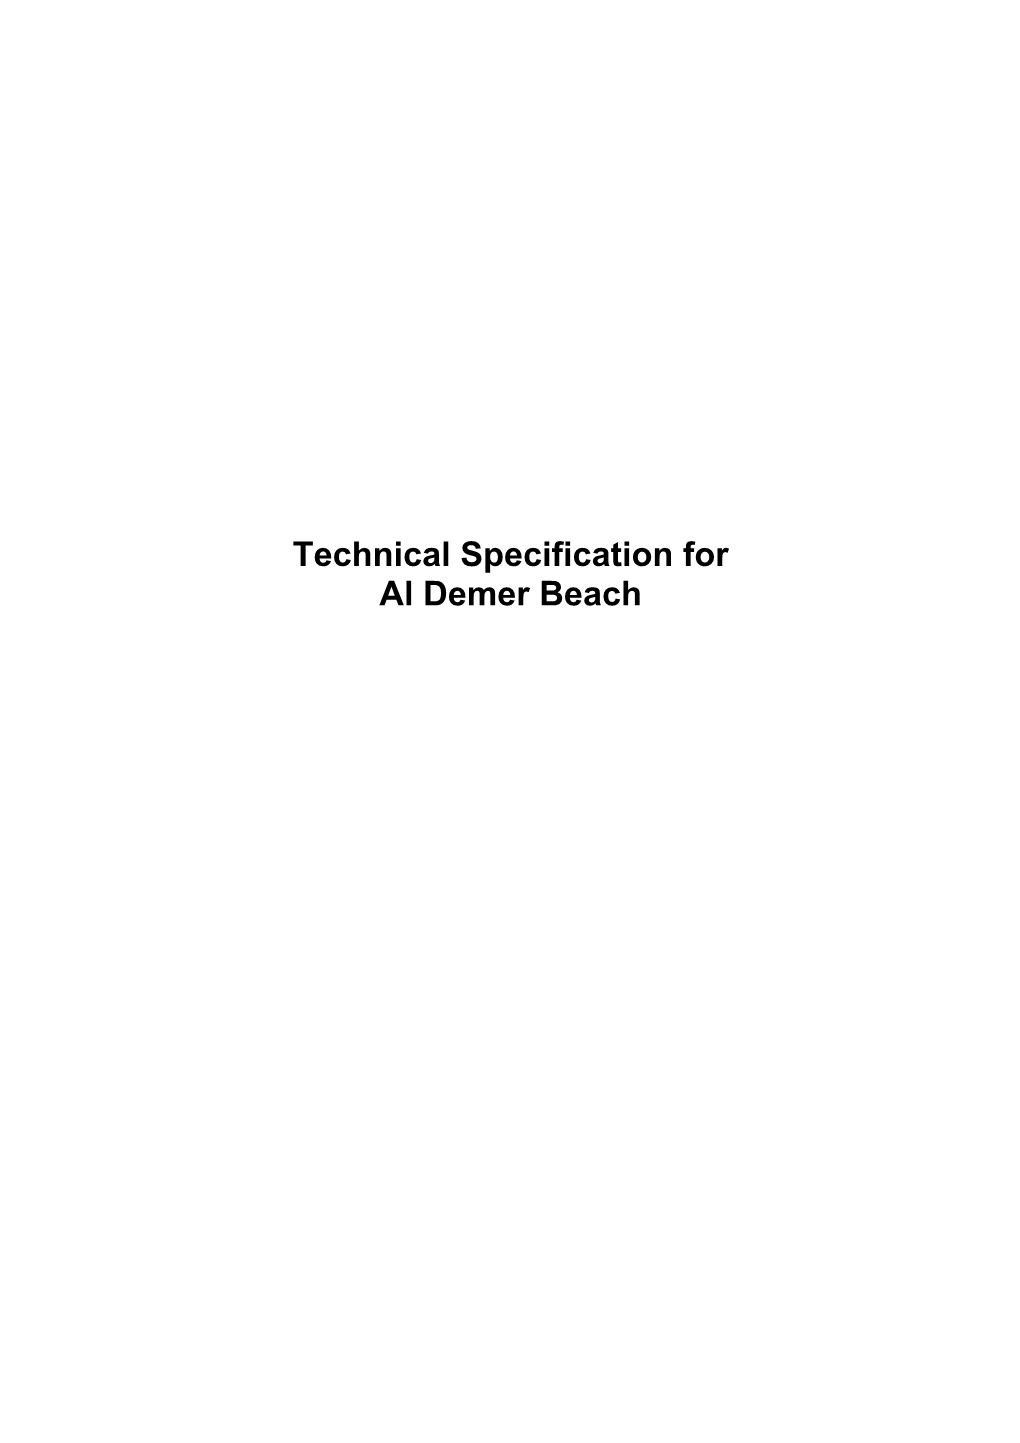 Technical Specification for Al Demer Beach